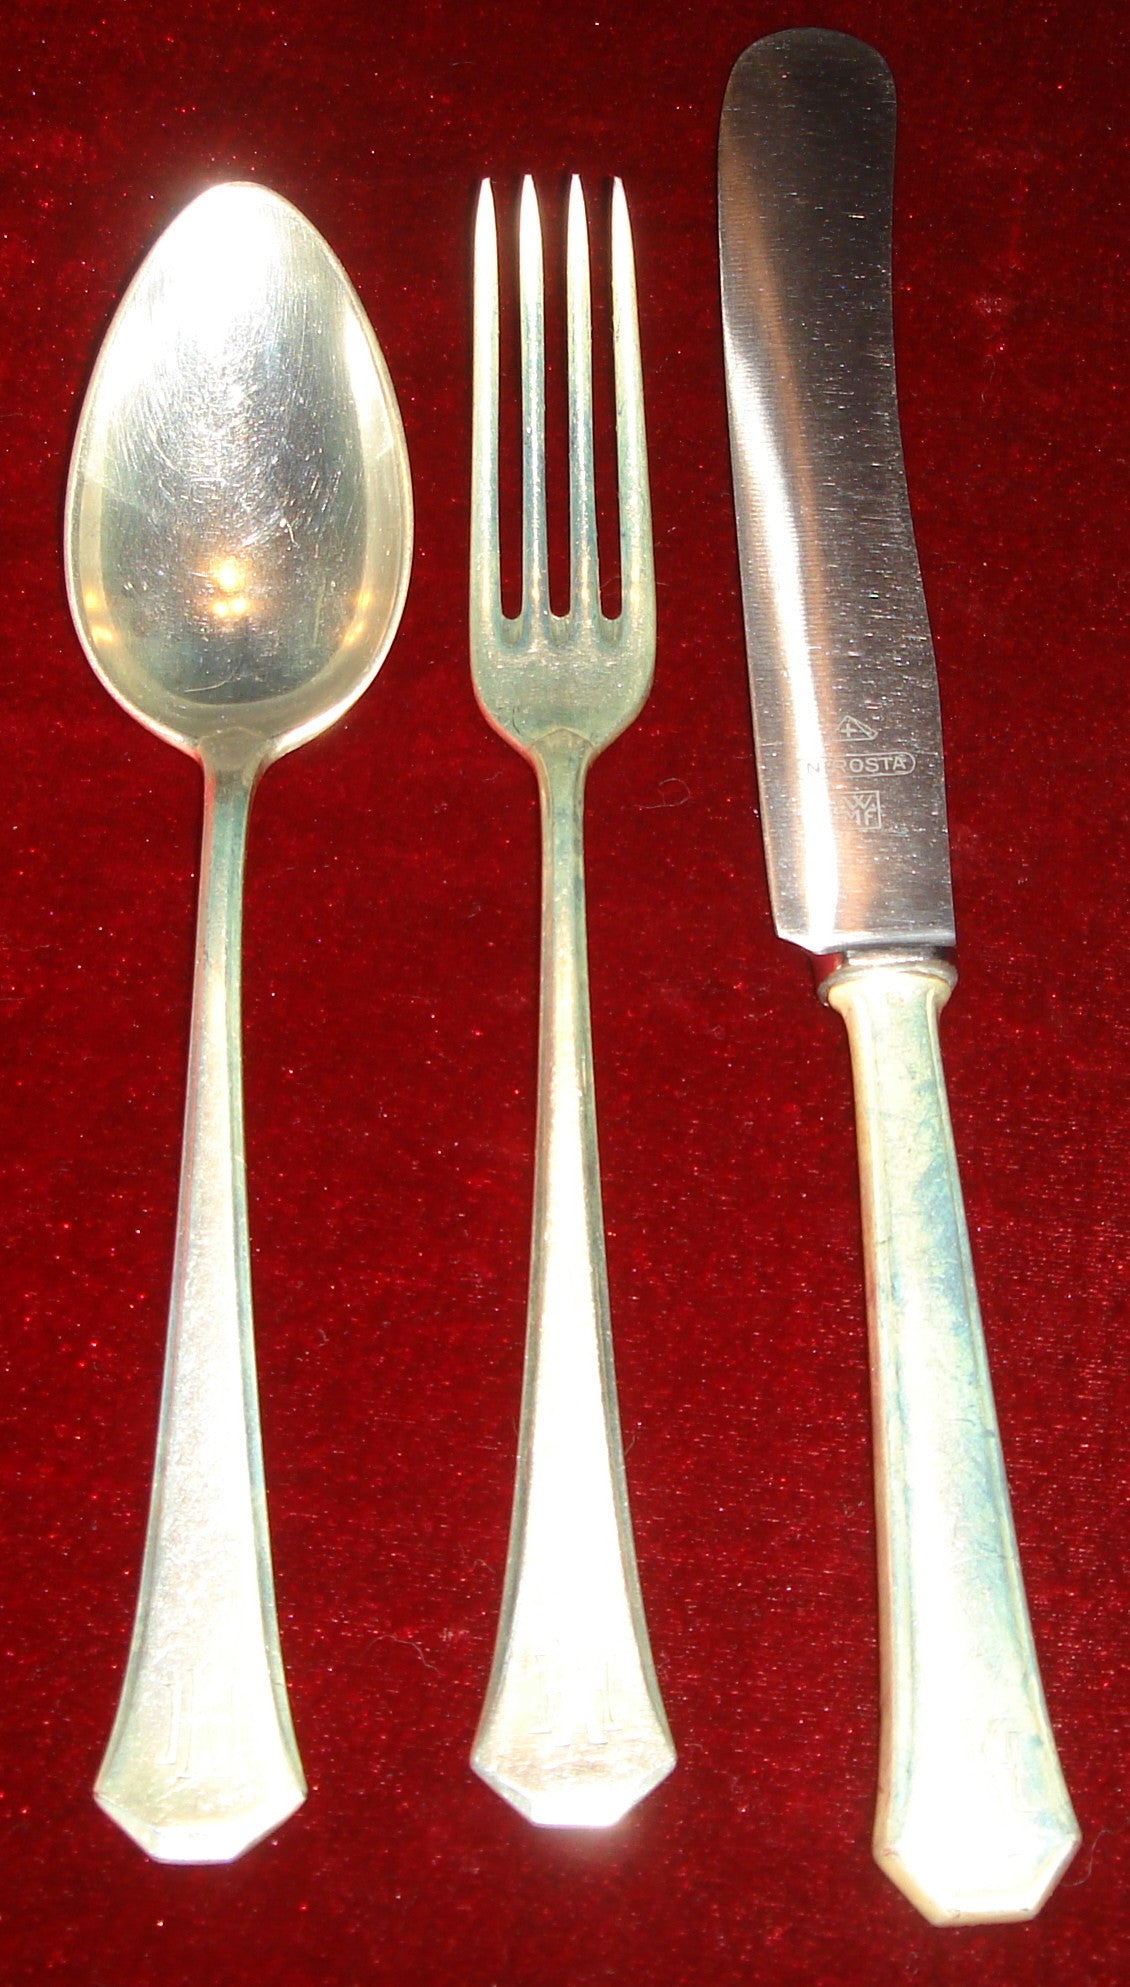 WMF 90 - Silver Plate - 3 Piece Service for One!